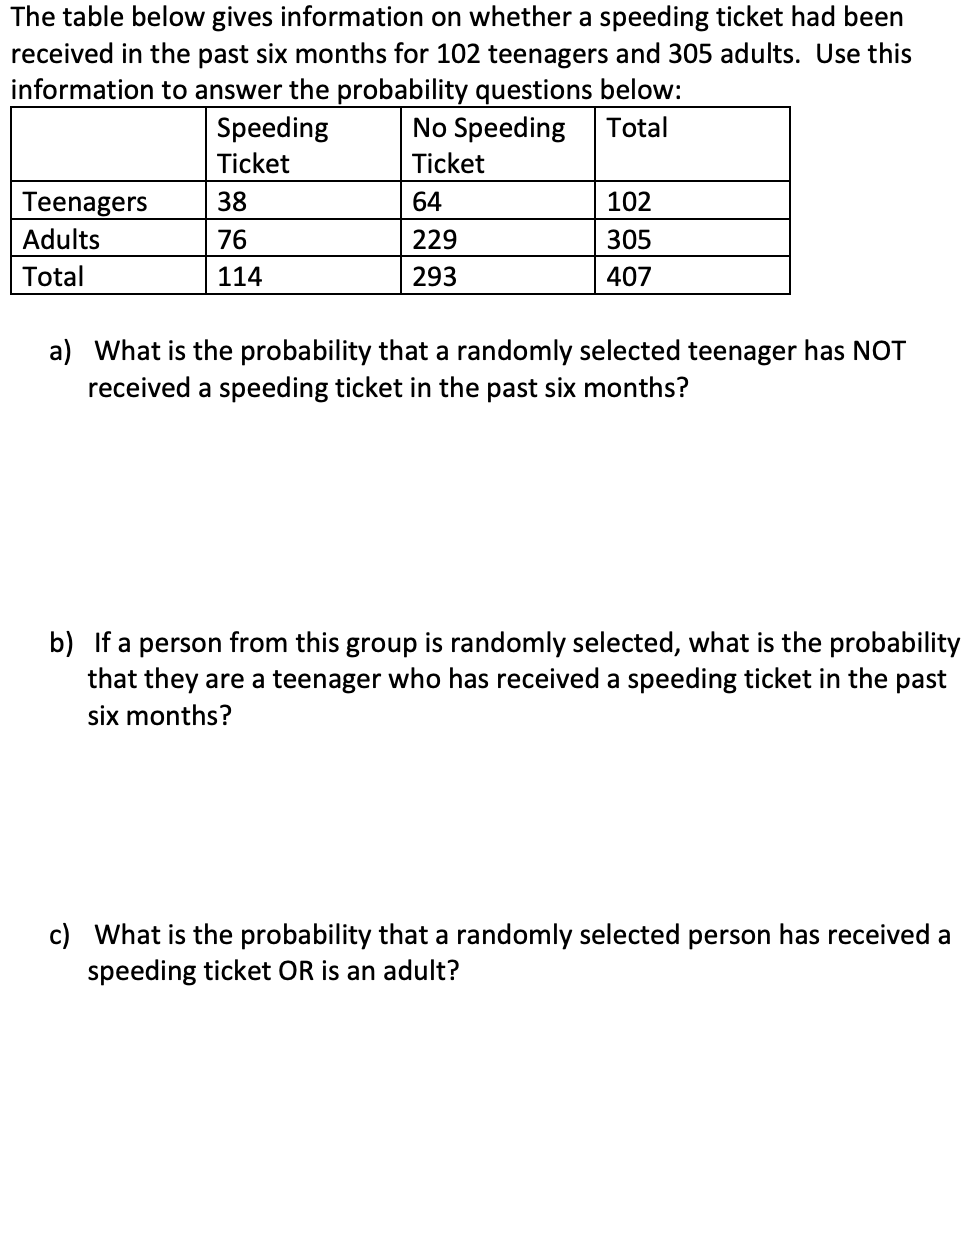 The table below gives information on whether a speeding ticket had been
received in the past six months for 102 teenagers and 305 adults. Use this
information to answer the probability questions below:
No Speeding
Ticket
Speeding
Total
Ticket
Teenagers
38
64
102
Adults
76
229
305
Total
114
293
407
a) What is the probability that a randomly selected teenager has NOT
received a speeding ticket in the past six months?
b) If a person from this group is randomly selected, what is the probability
that they are a teenager who has received a speeding ticket in the past
six months?
c) What is the probability that a randomly selected person has received a
speeding ticket OR is an adult?
